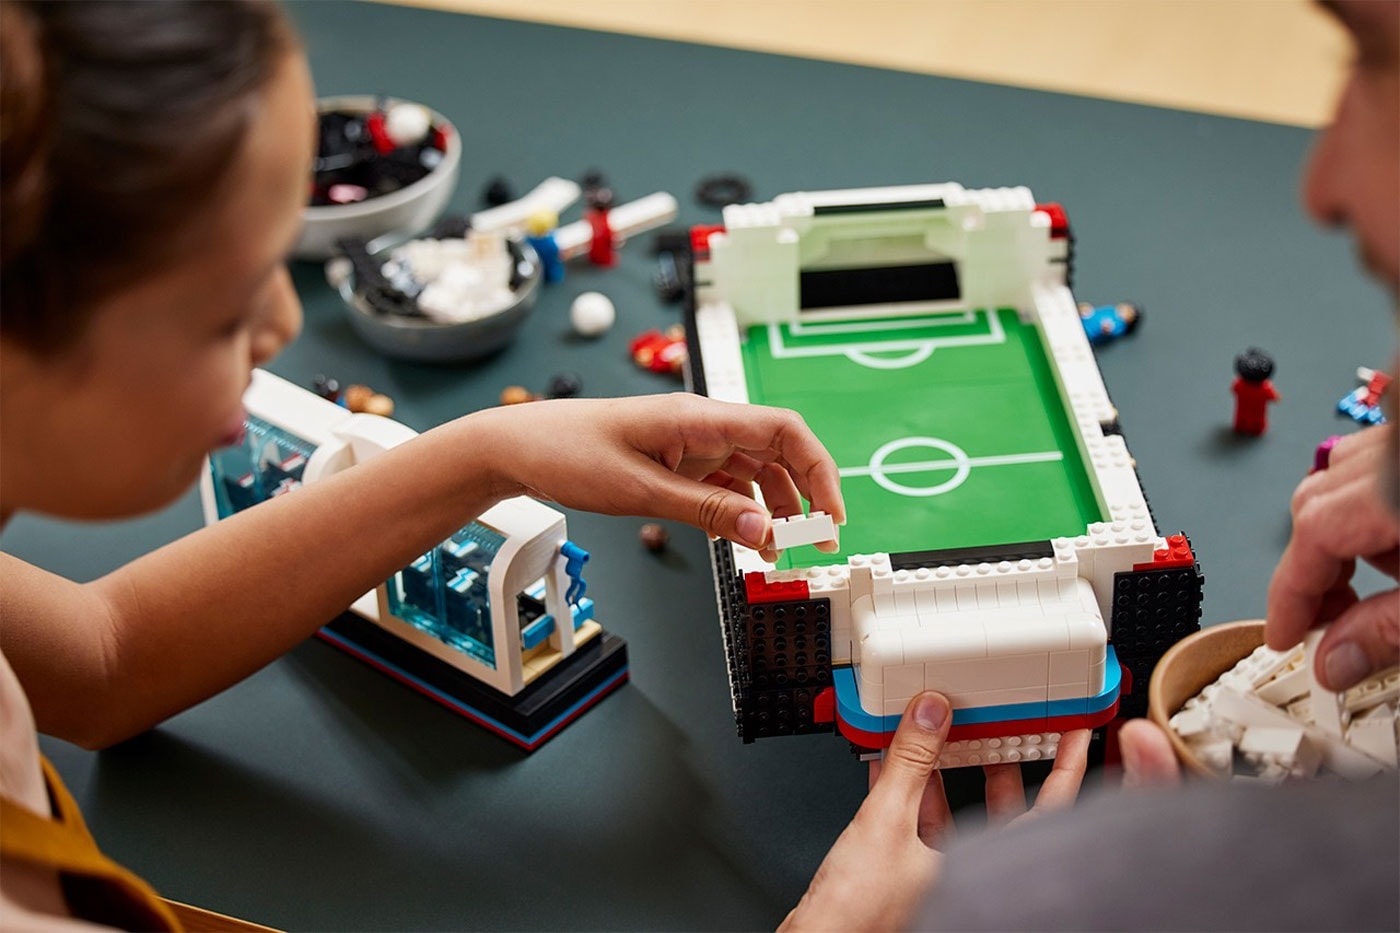 These LEGO football-themed sets are available right now